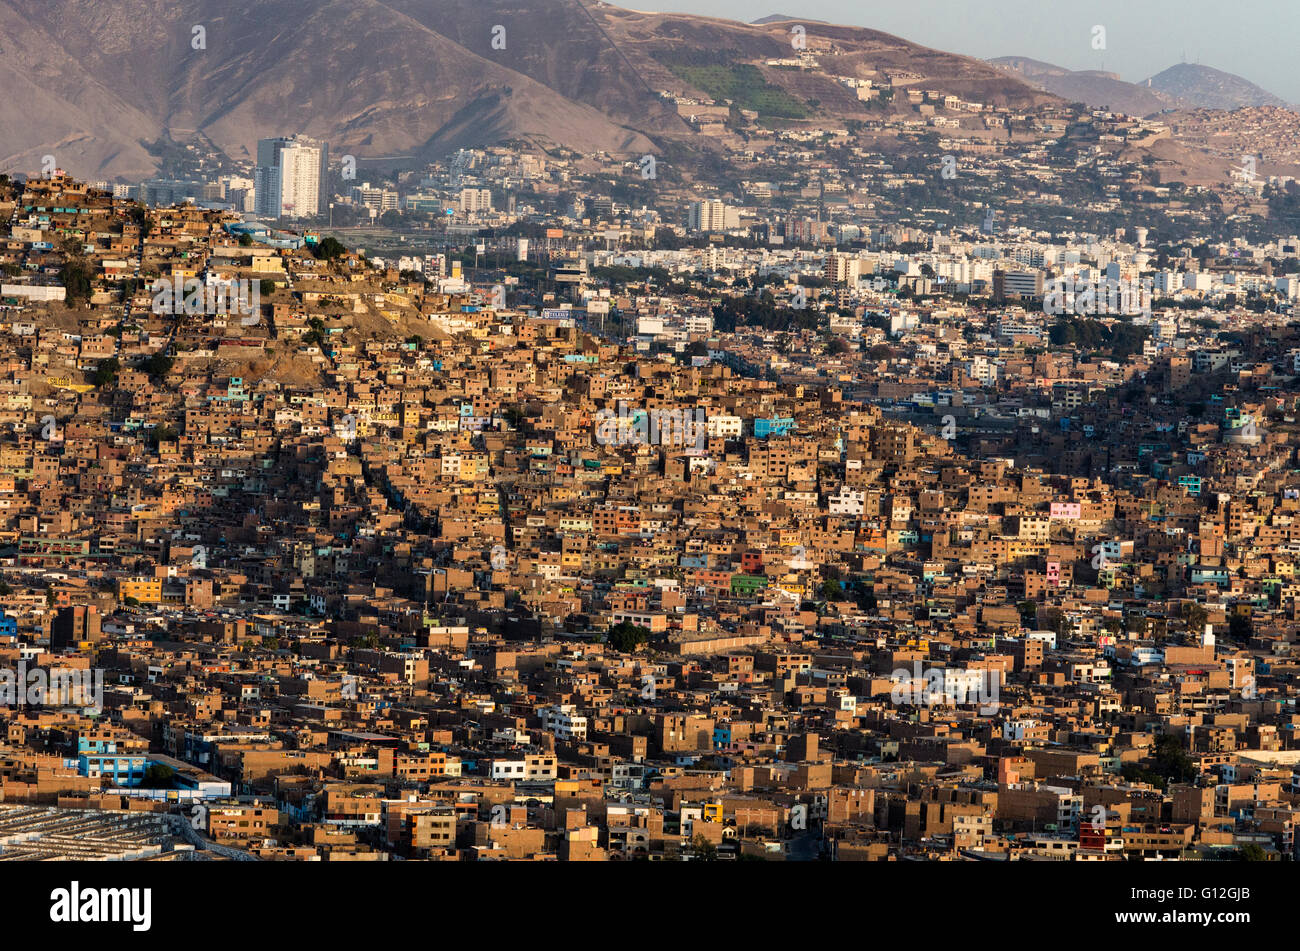 Aerial view of El Agustino district in Lima city. Peru. Stock Photo